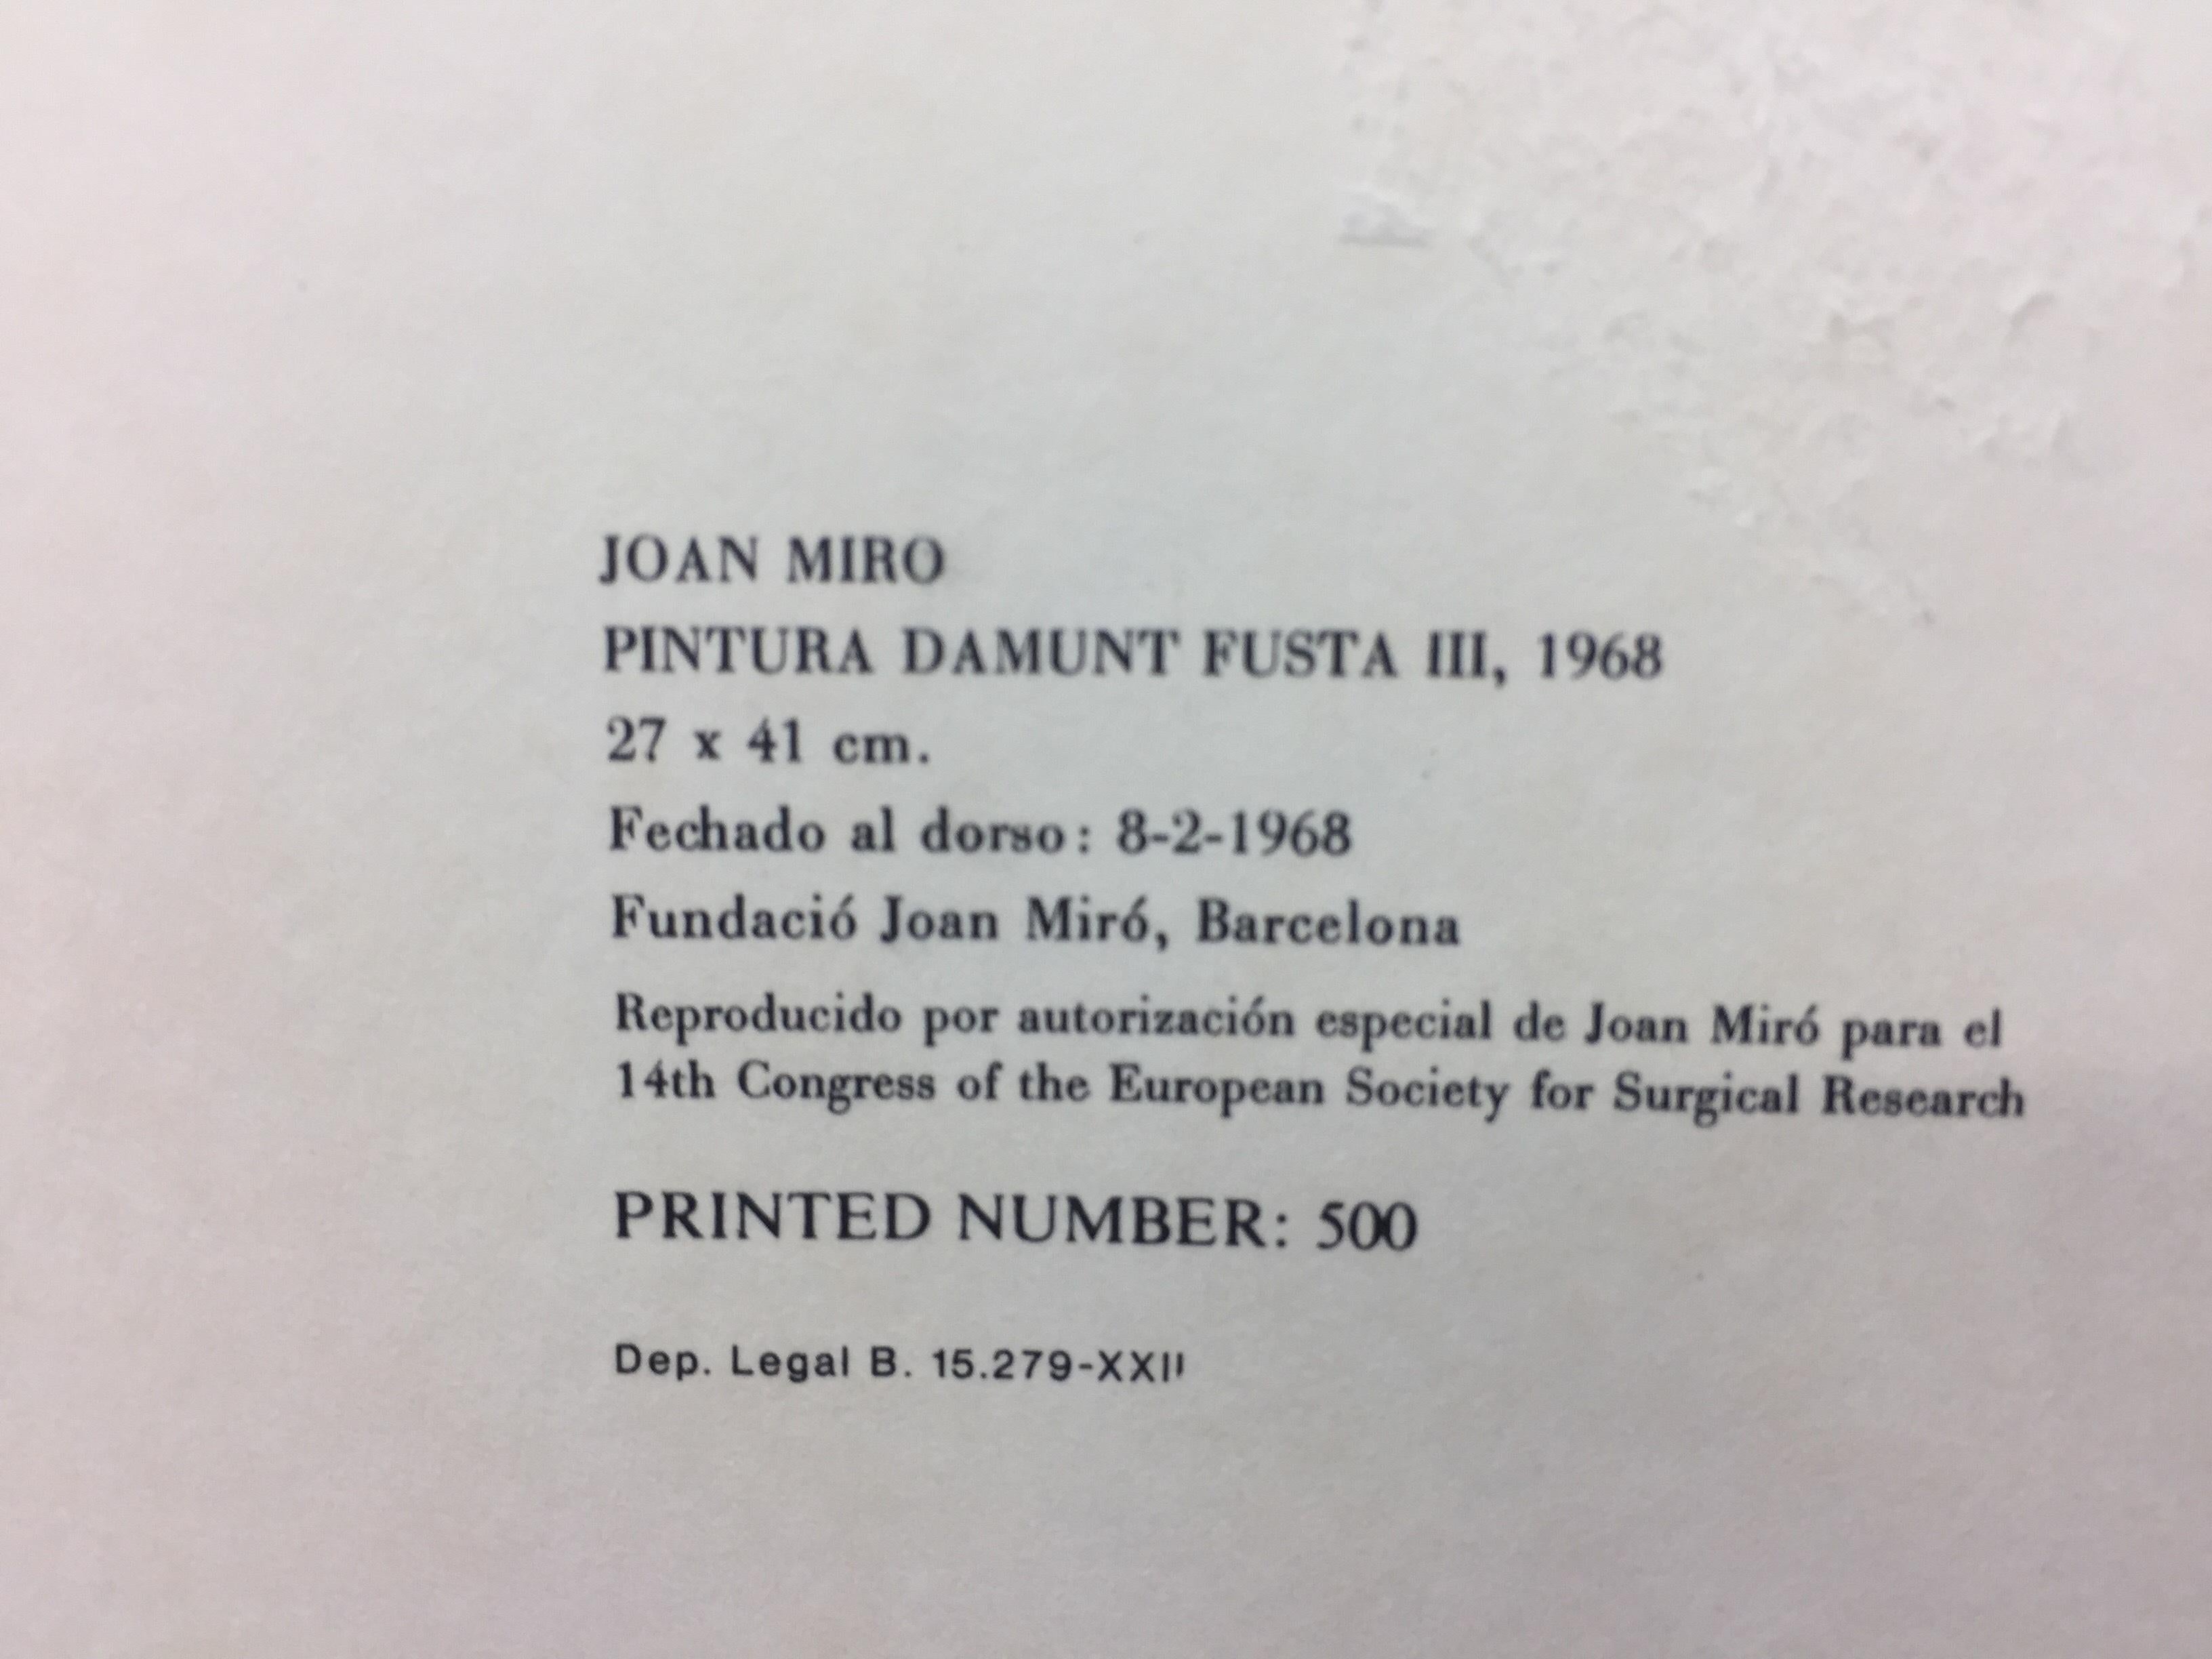 Vintage reproductive lithograph depicting a 1968 Miro work titled PINTURA DAMUNT FUSTA III
published by Foundation Joan Miro, Barcelona
Edition of 500


MIRO Ferra, Joan (Barcelona, 1893 - Palma de Mallorca, 1983).
Joan Miró was one of the great